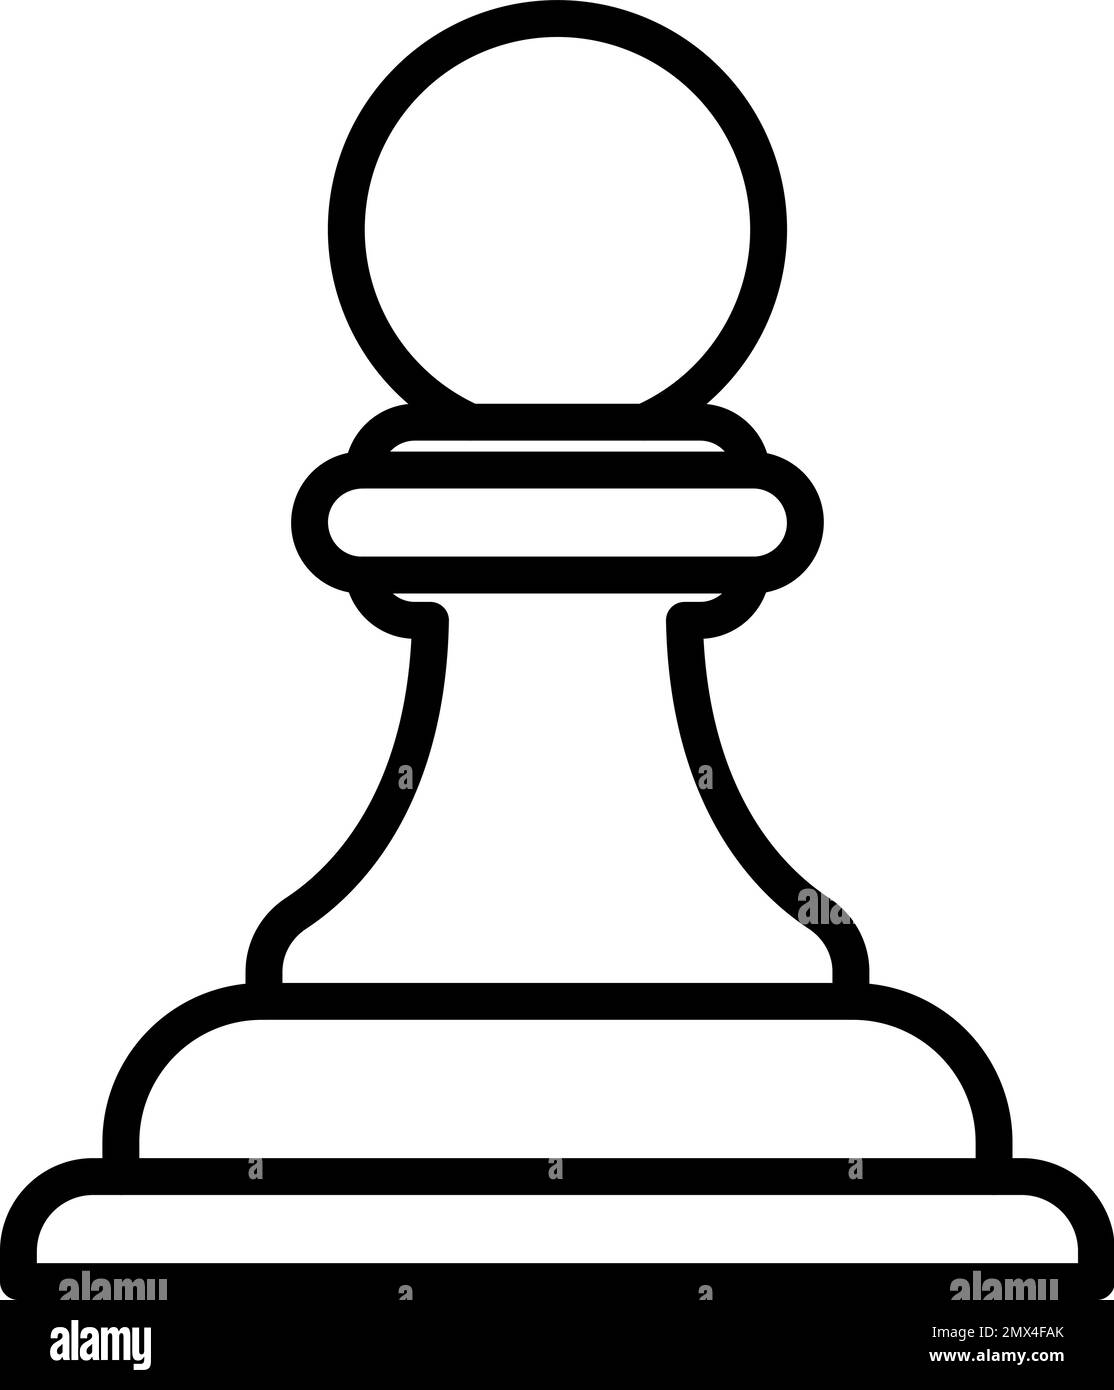 Pawn line icon. Strategy symbol. Chess piece Stock Vector